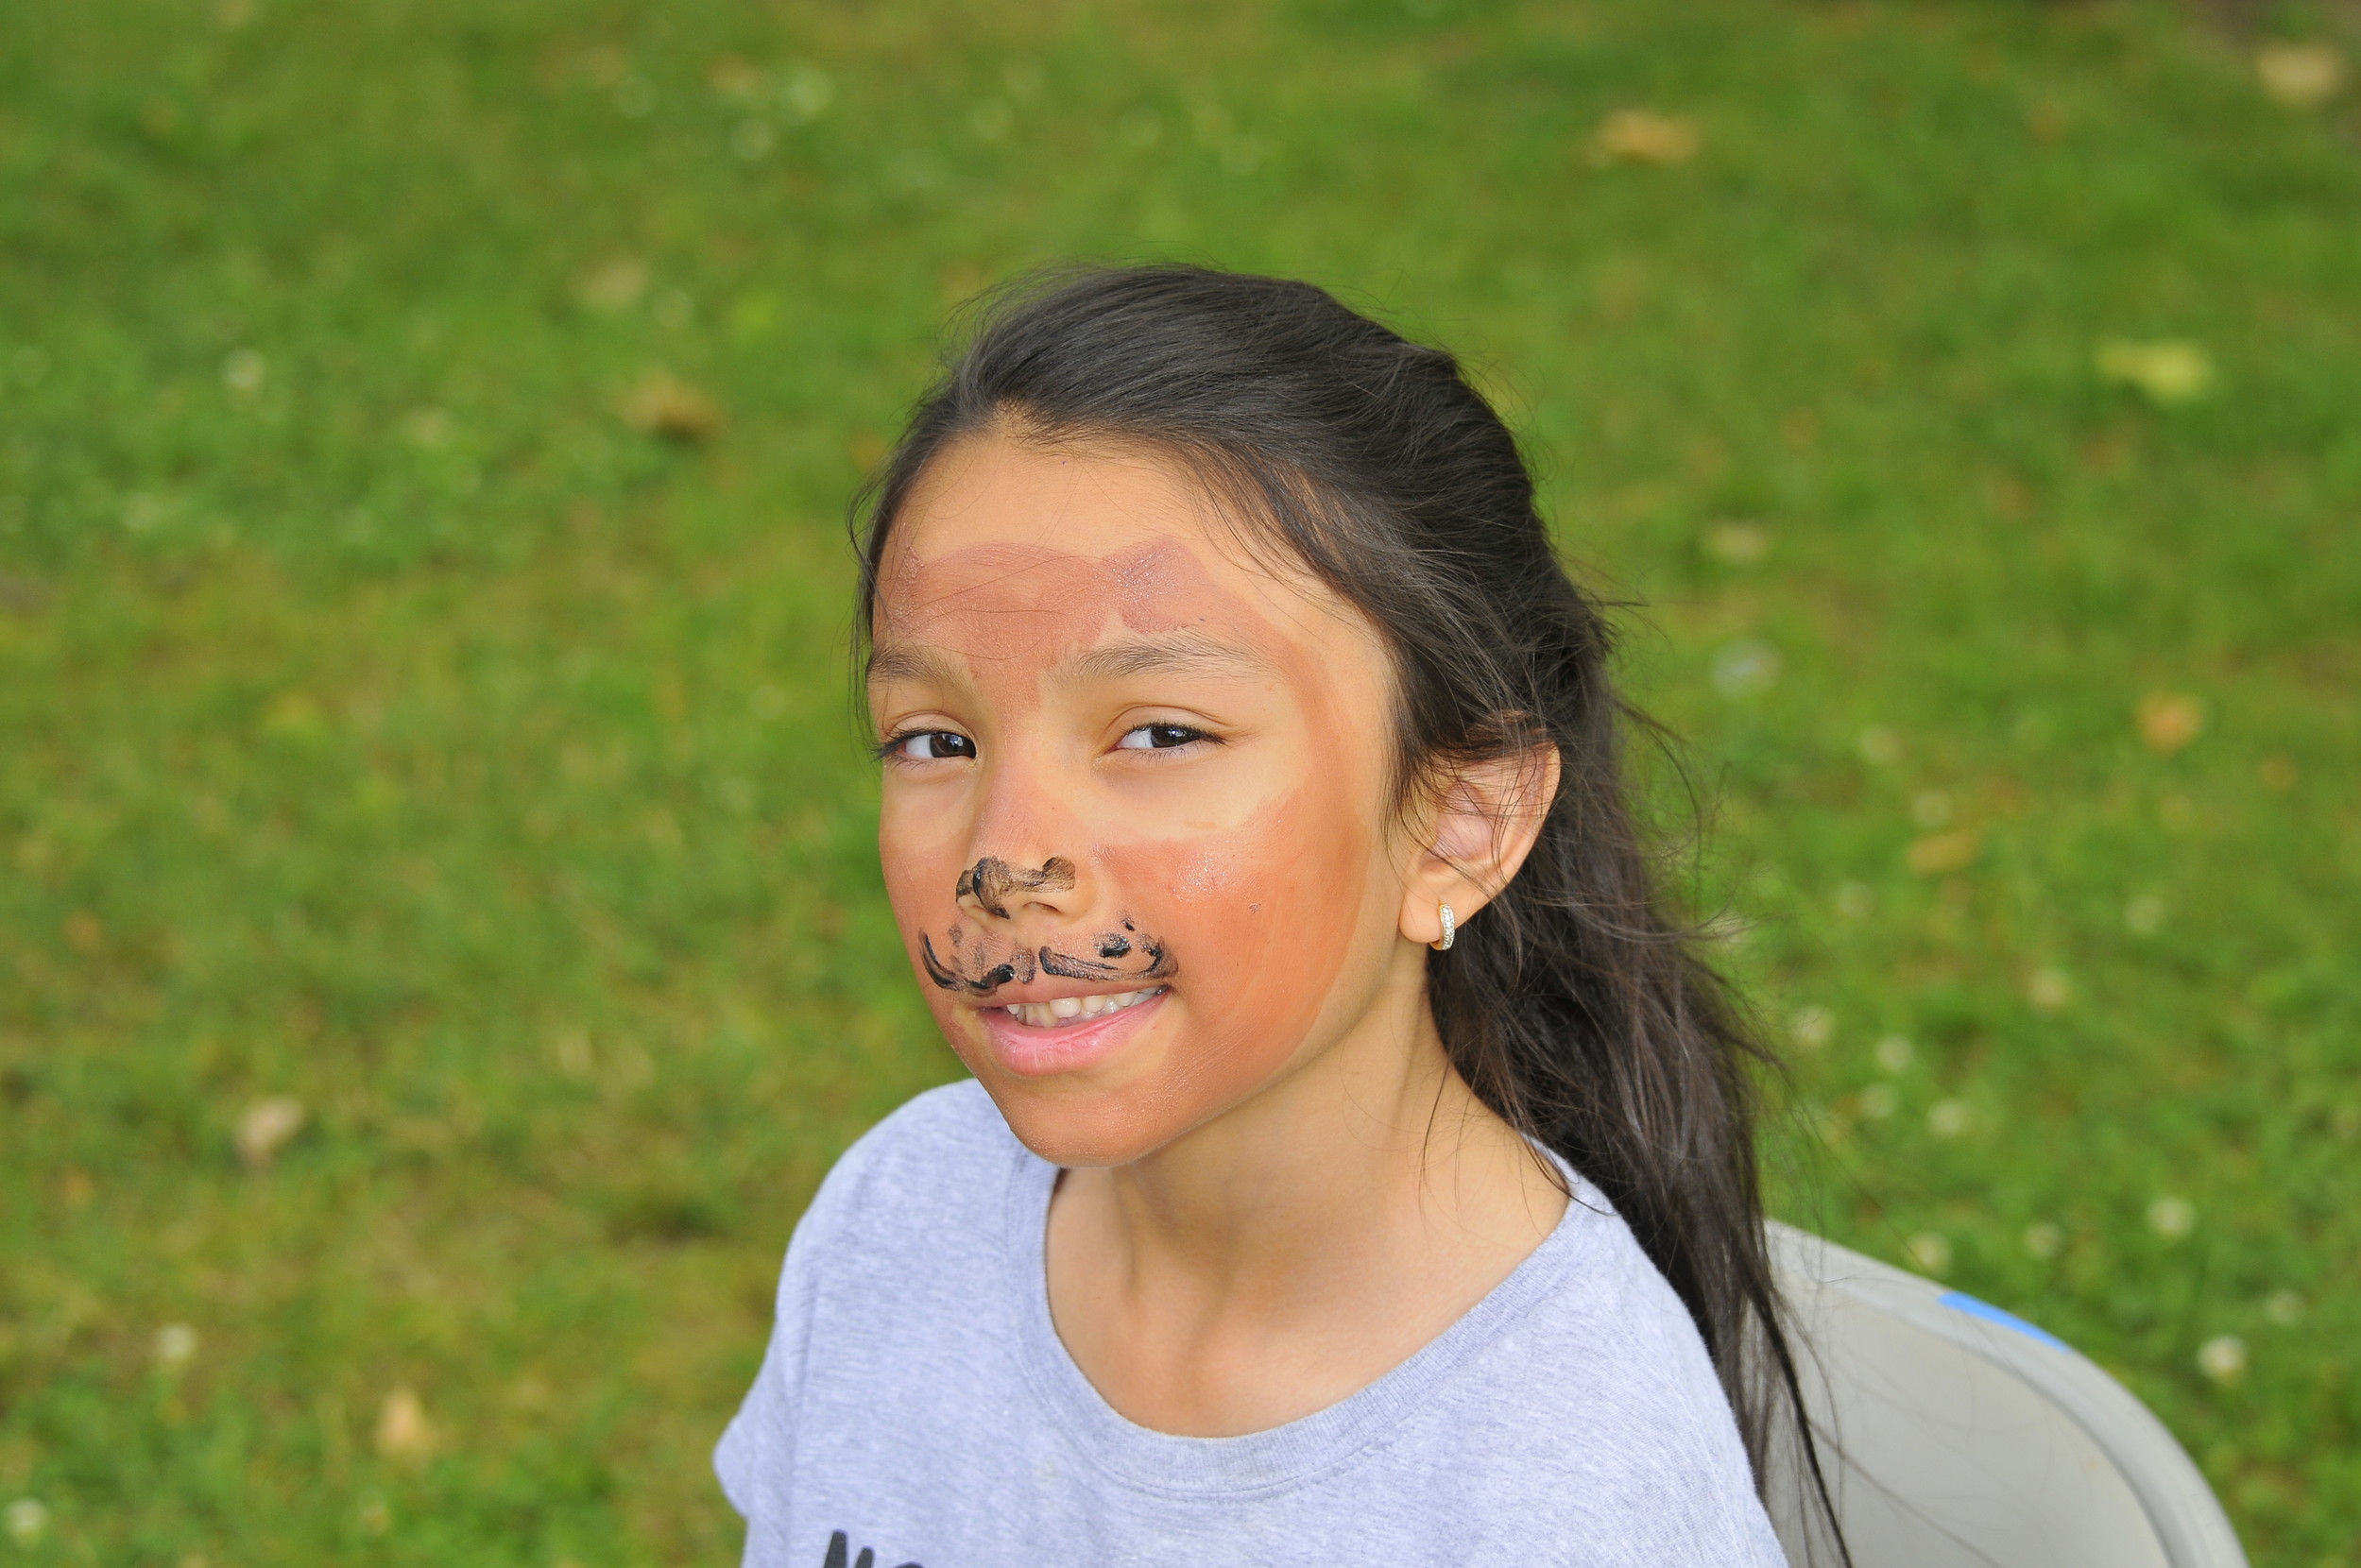 Victoria Lambriola, 8, got her face painted at the celebration.